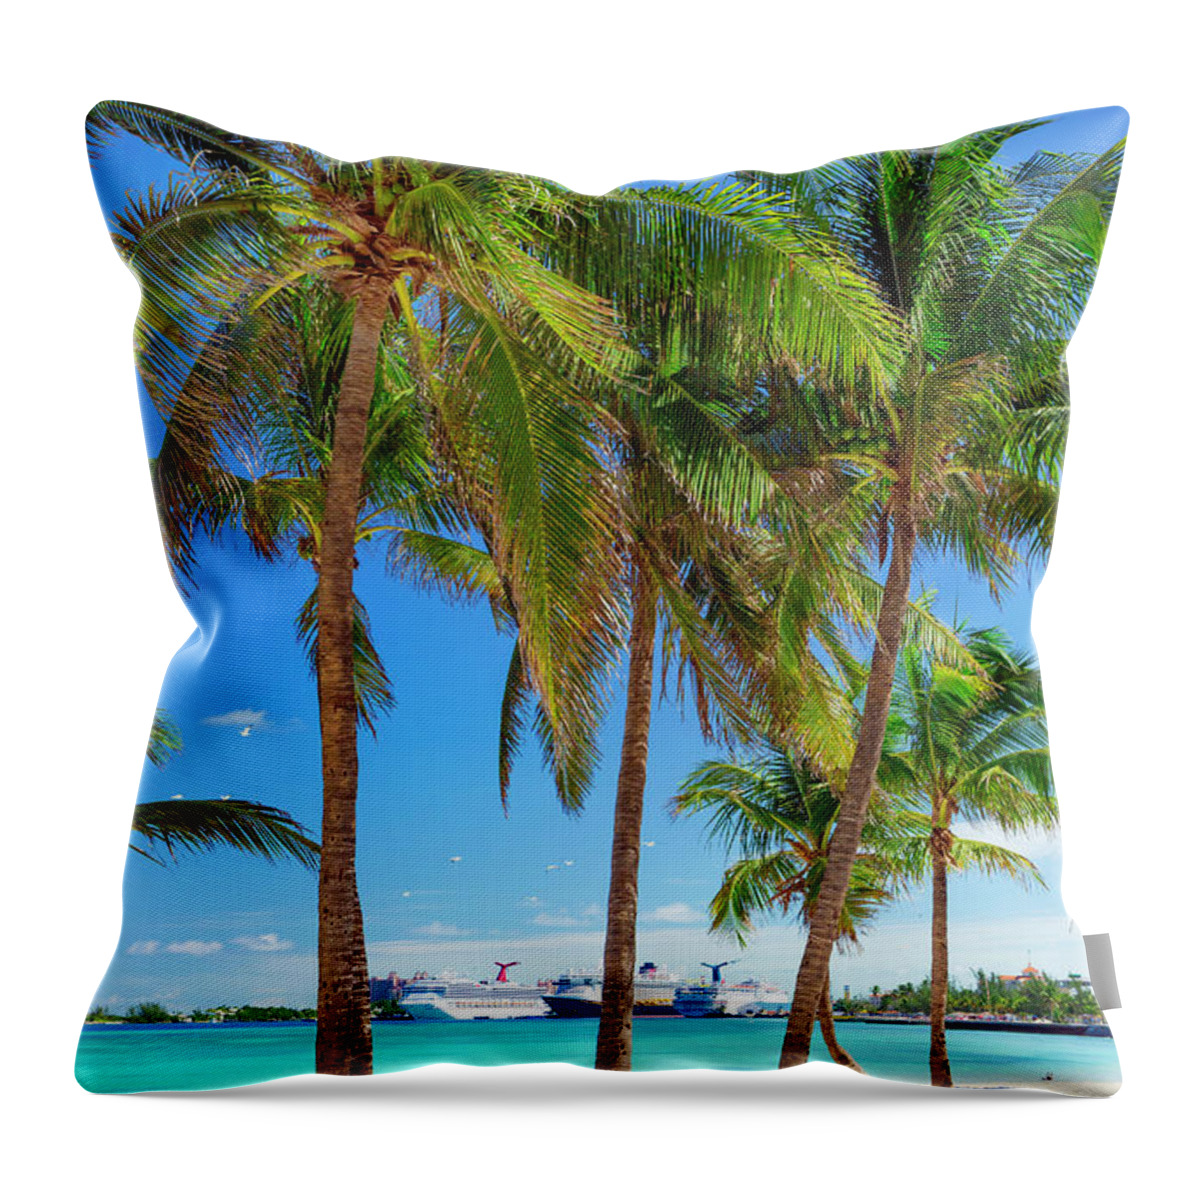 Estock Throw Pillow featuring the digital art Tropical Beach With Palm Trees by Pietro Canali